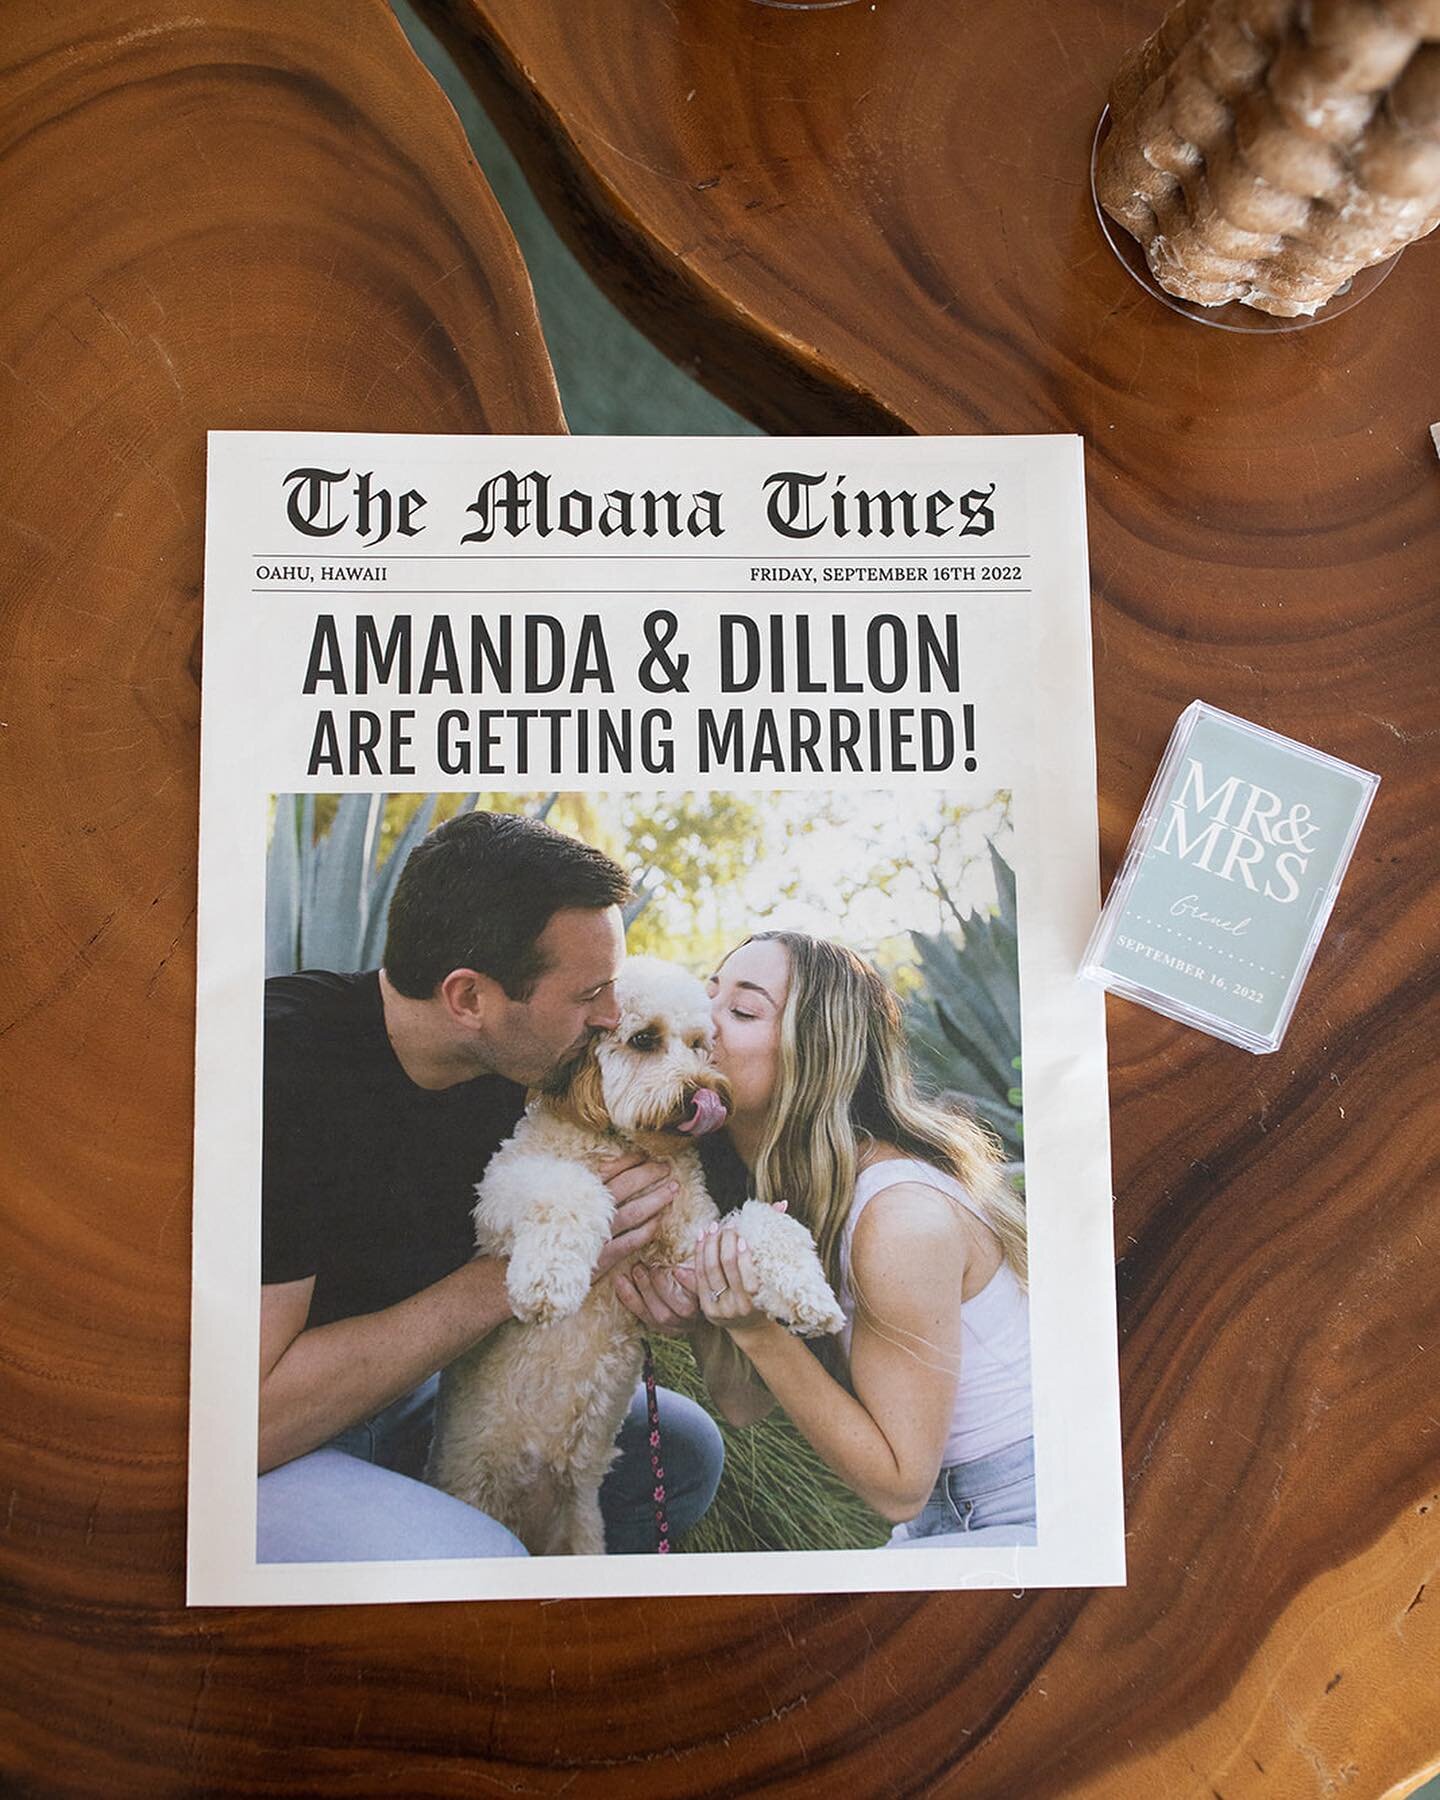 Amanda + Dillon&rsquo;s wedding was nothing short of ✨perfect✨ their beautiful celebration will be up on the blog next week, but for now enjoy these stunning captures by @theoahuphotographer 😍

Congrats A + D! 💍🎉

#oahuweddingplanner #hawaiiweddin